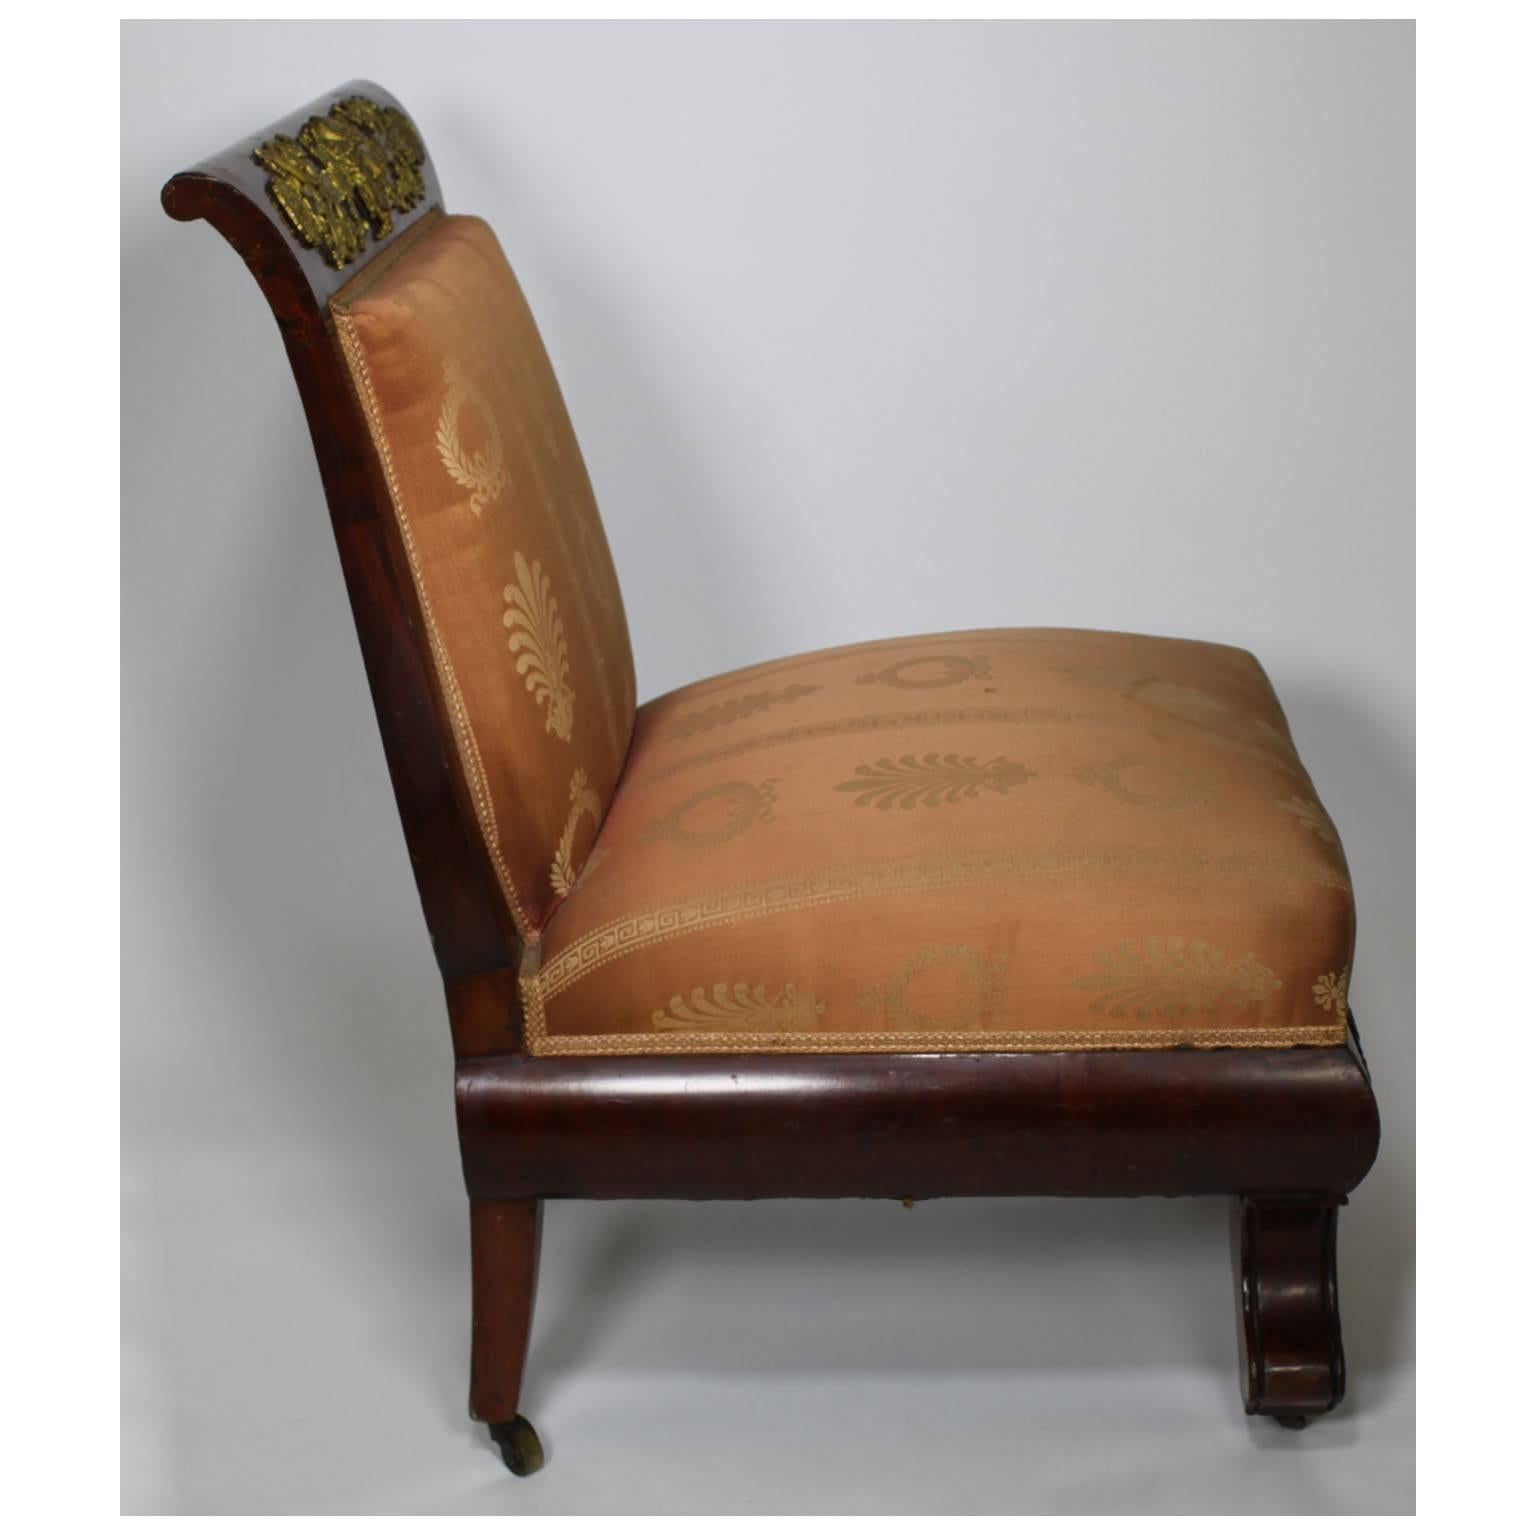 French Napoleon III Empire Mahogany and Ormolu-Mounted Low Chair, after Thomire 1